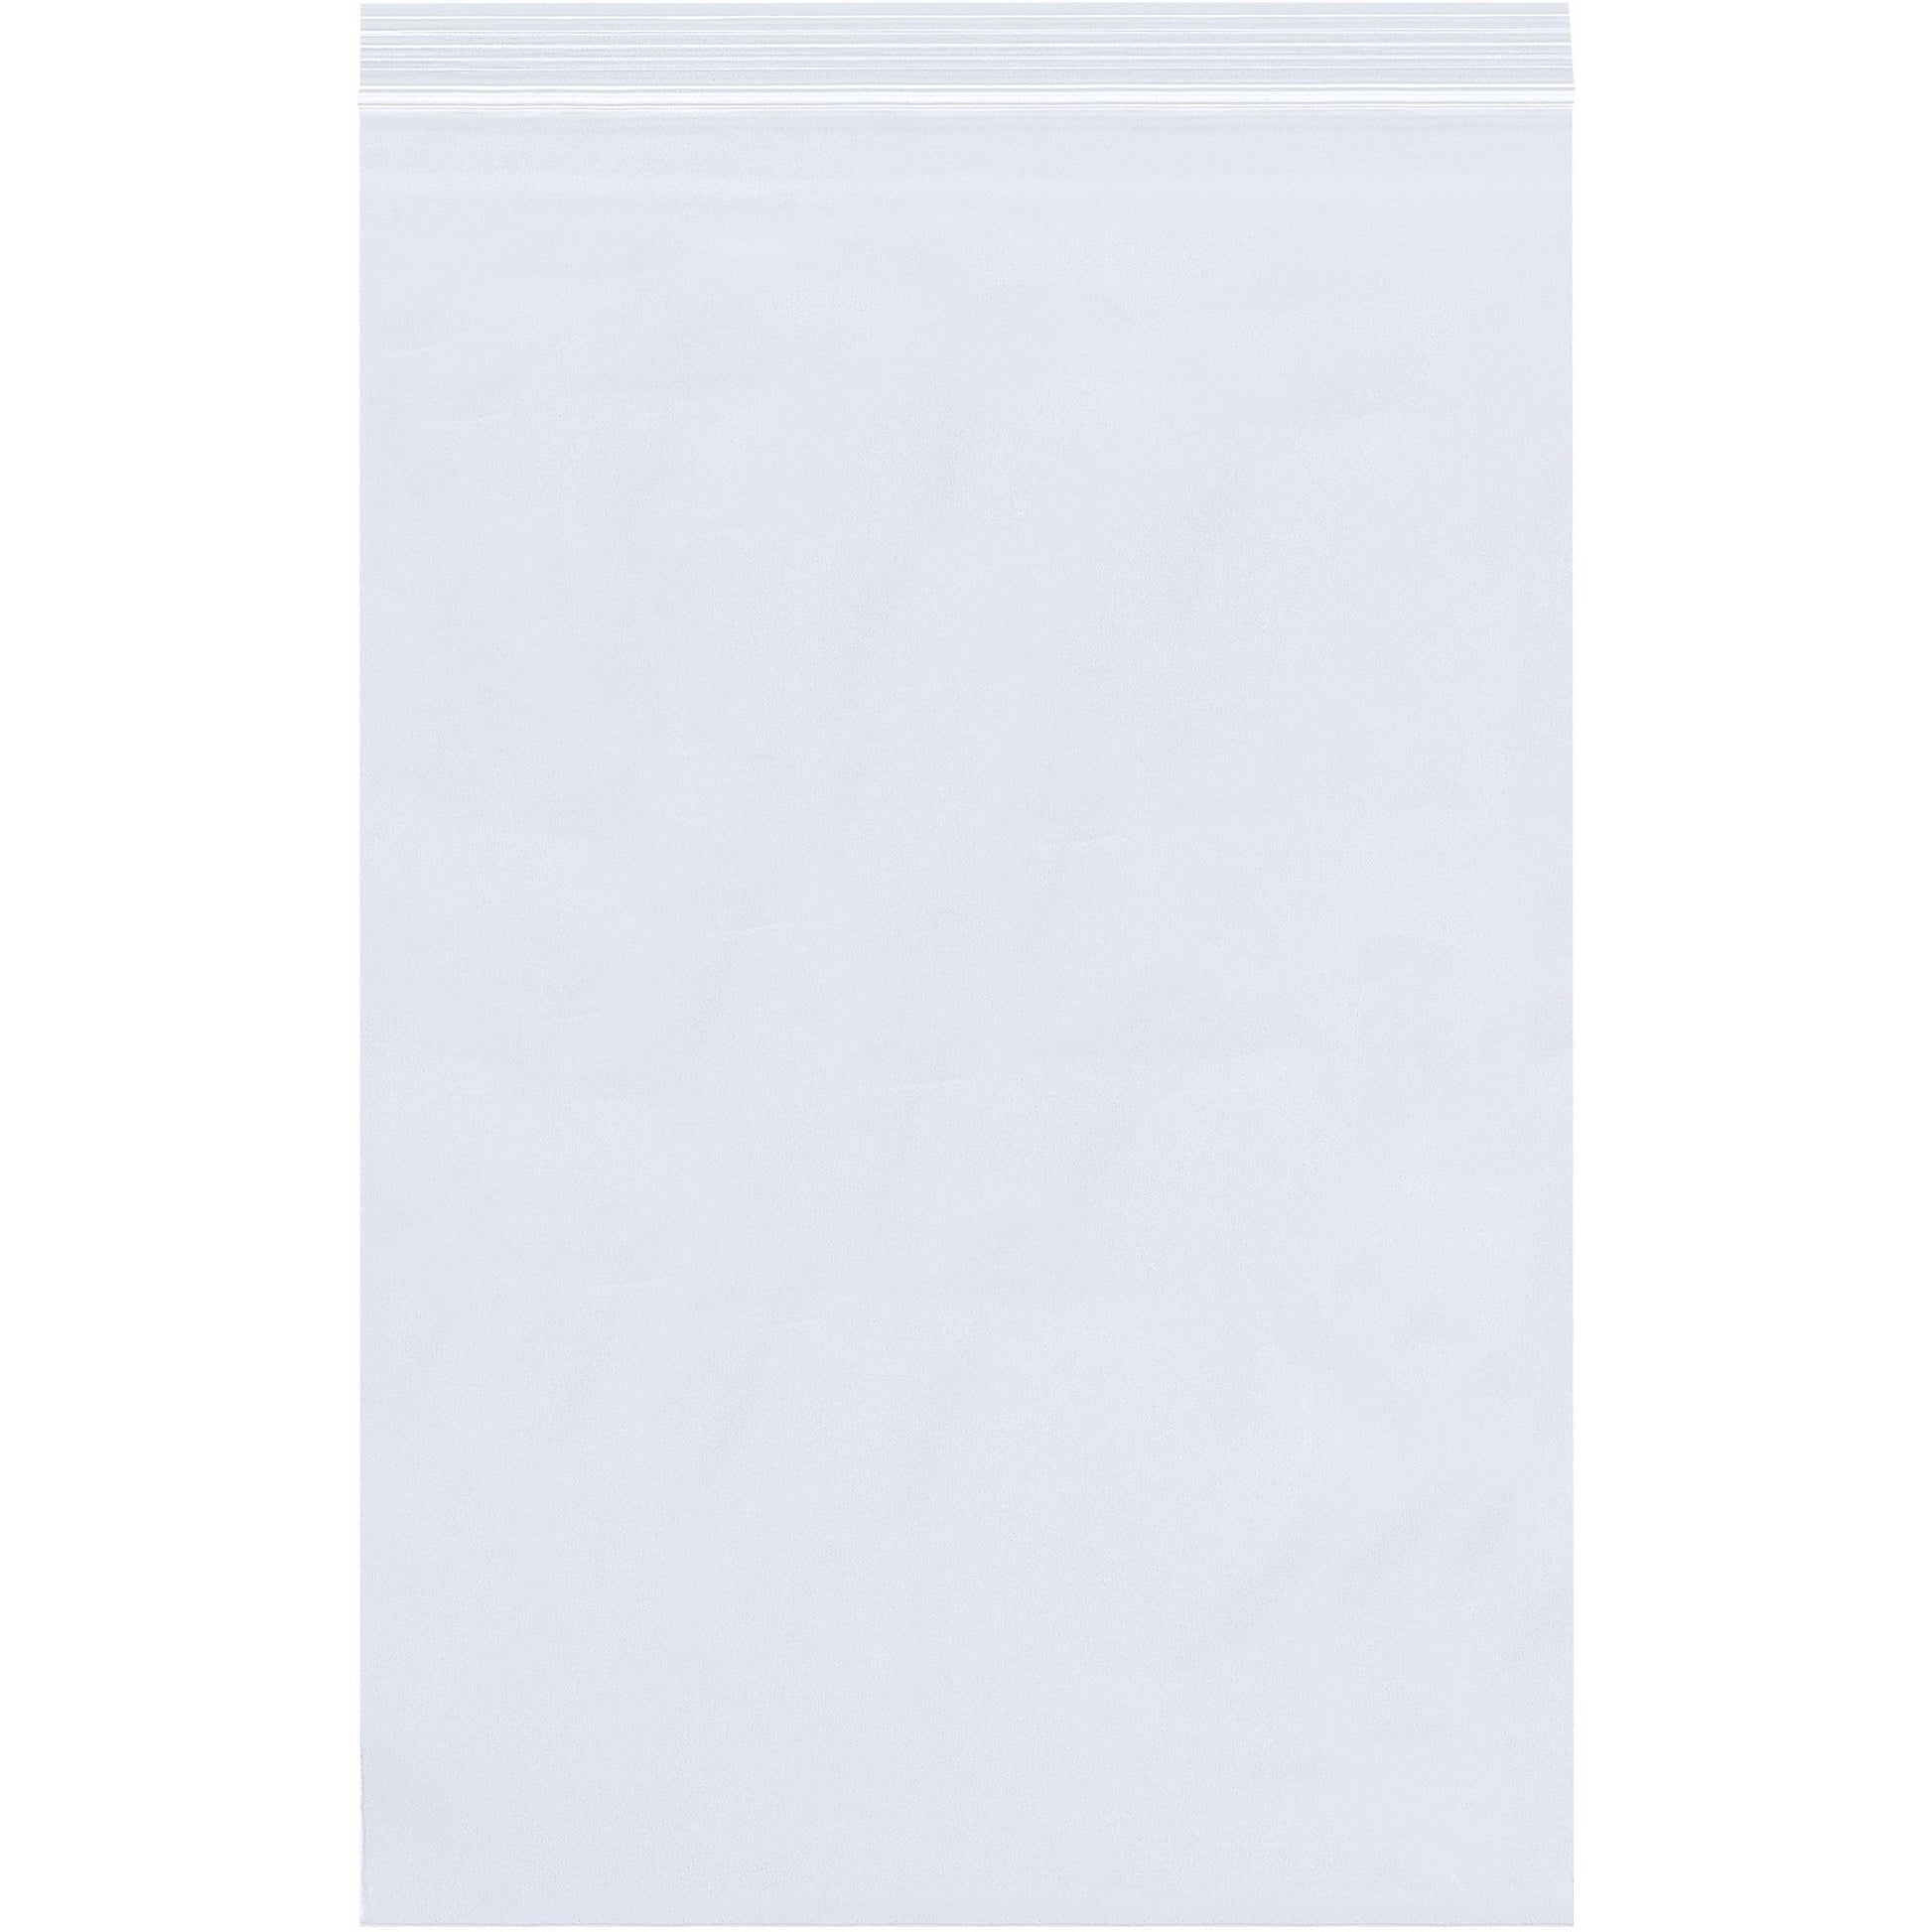 4 x 7" - 2 Mil Reclosable Poly Bags - PB3570